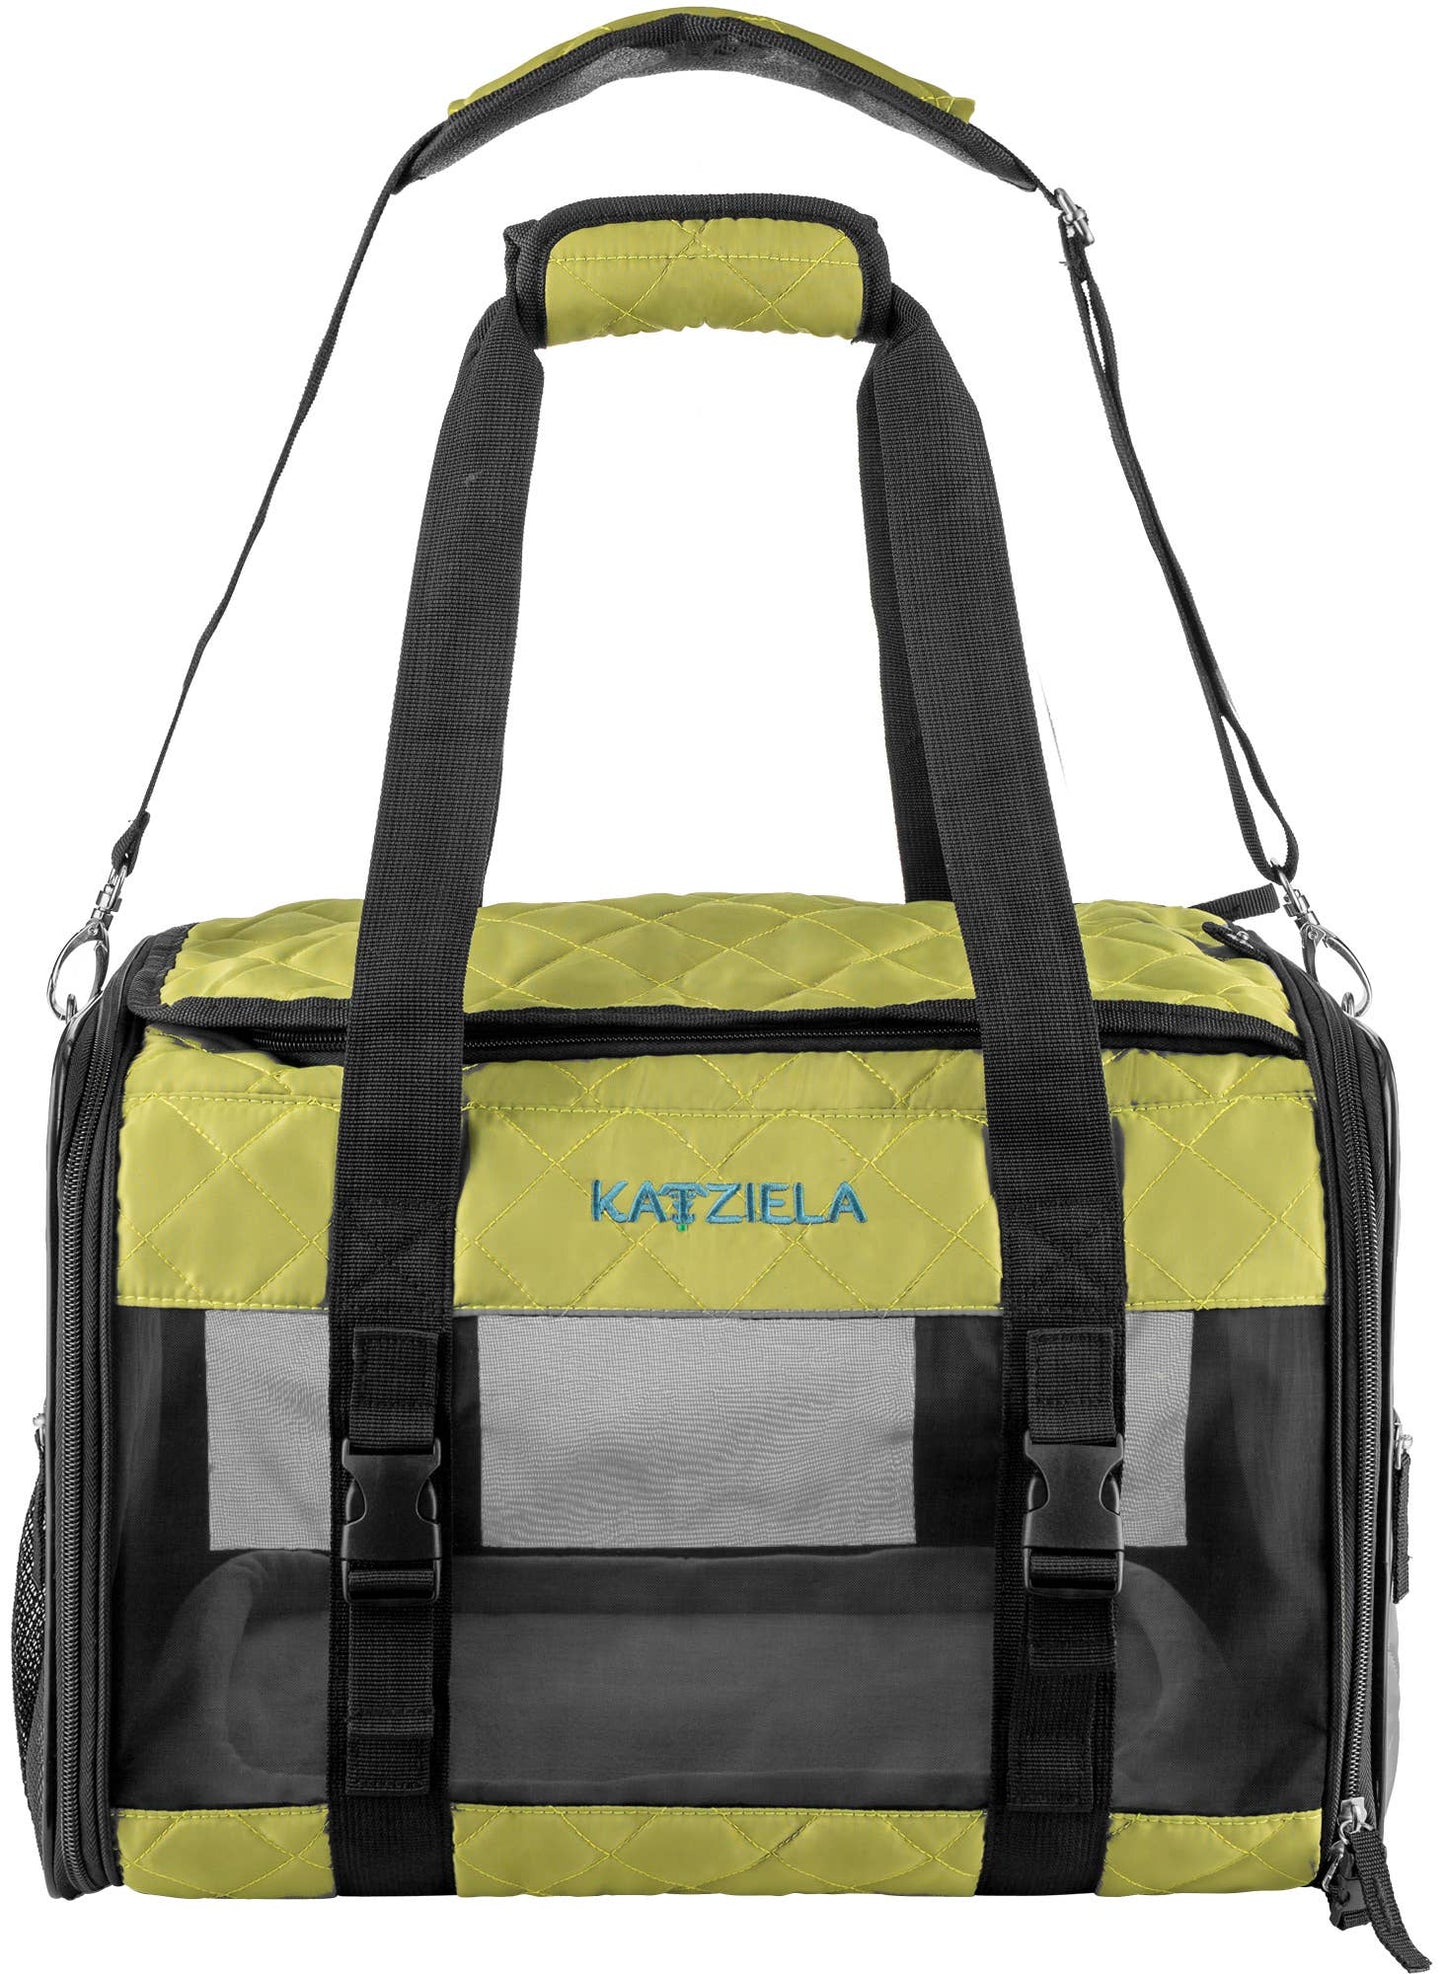 Load image into Gallery viewer, Katziela Quilted Companion Carrier Medium Image
